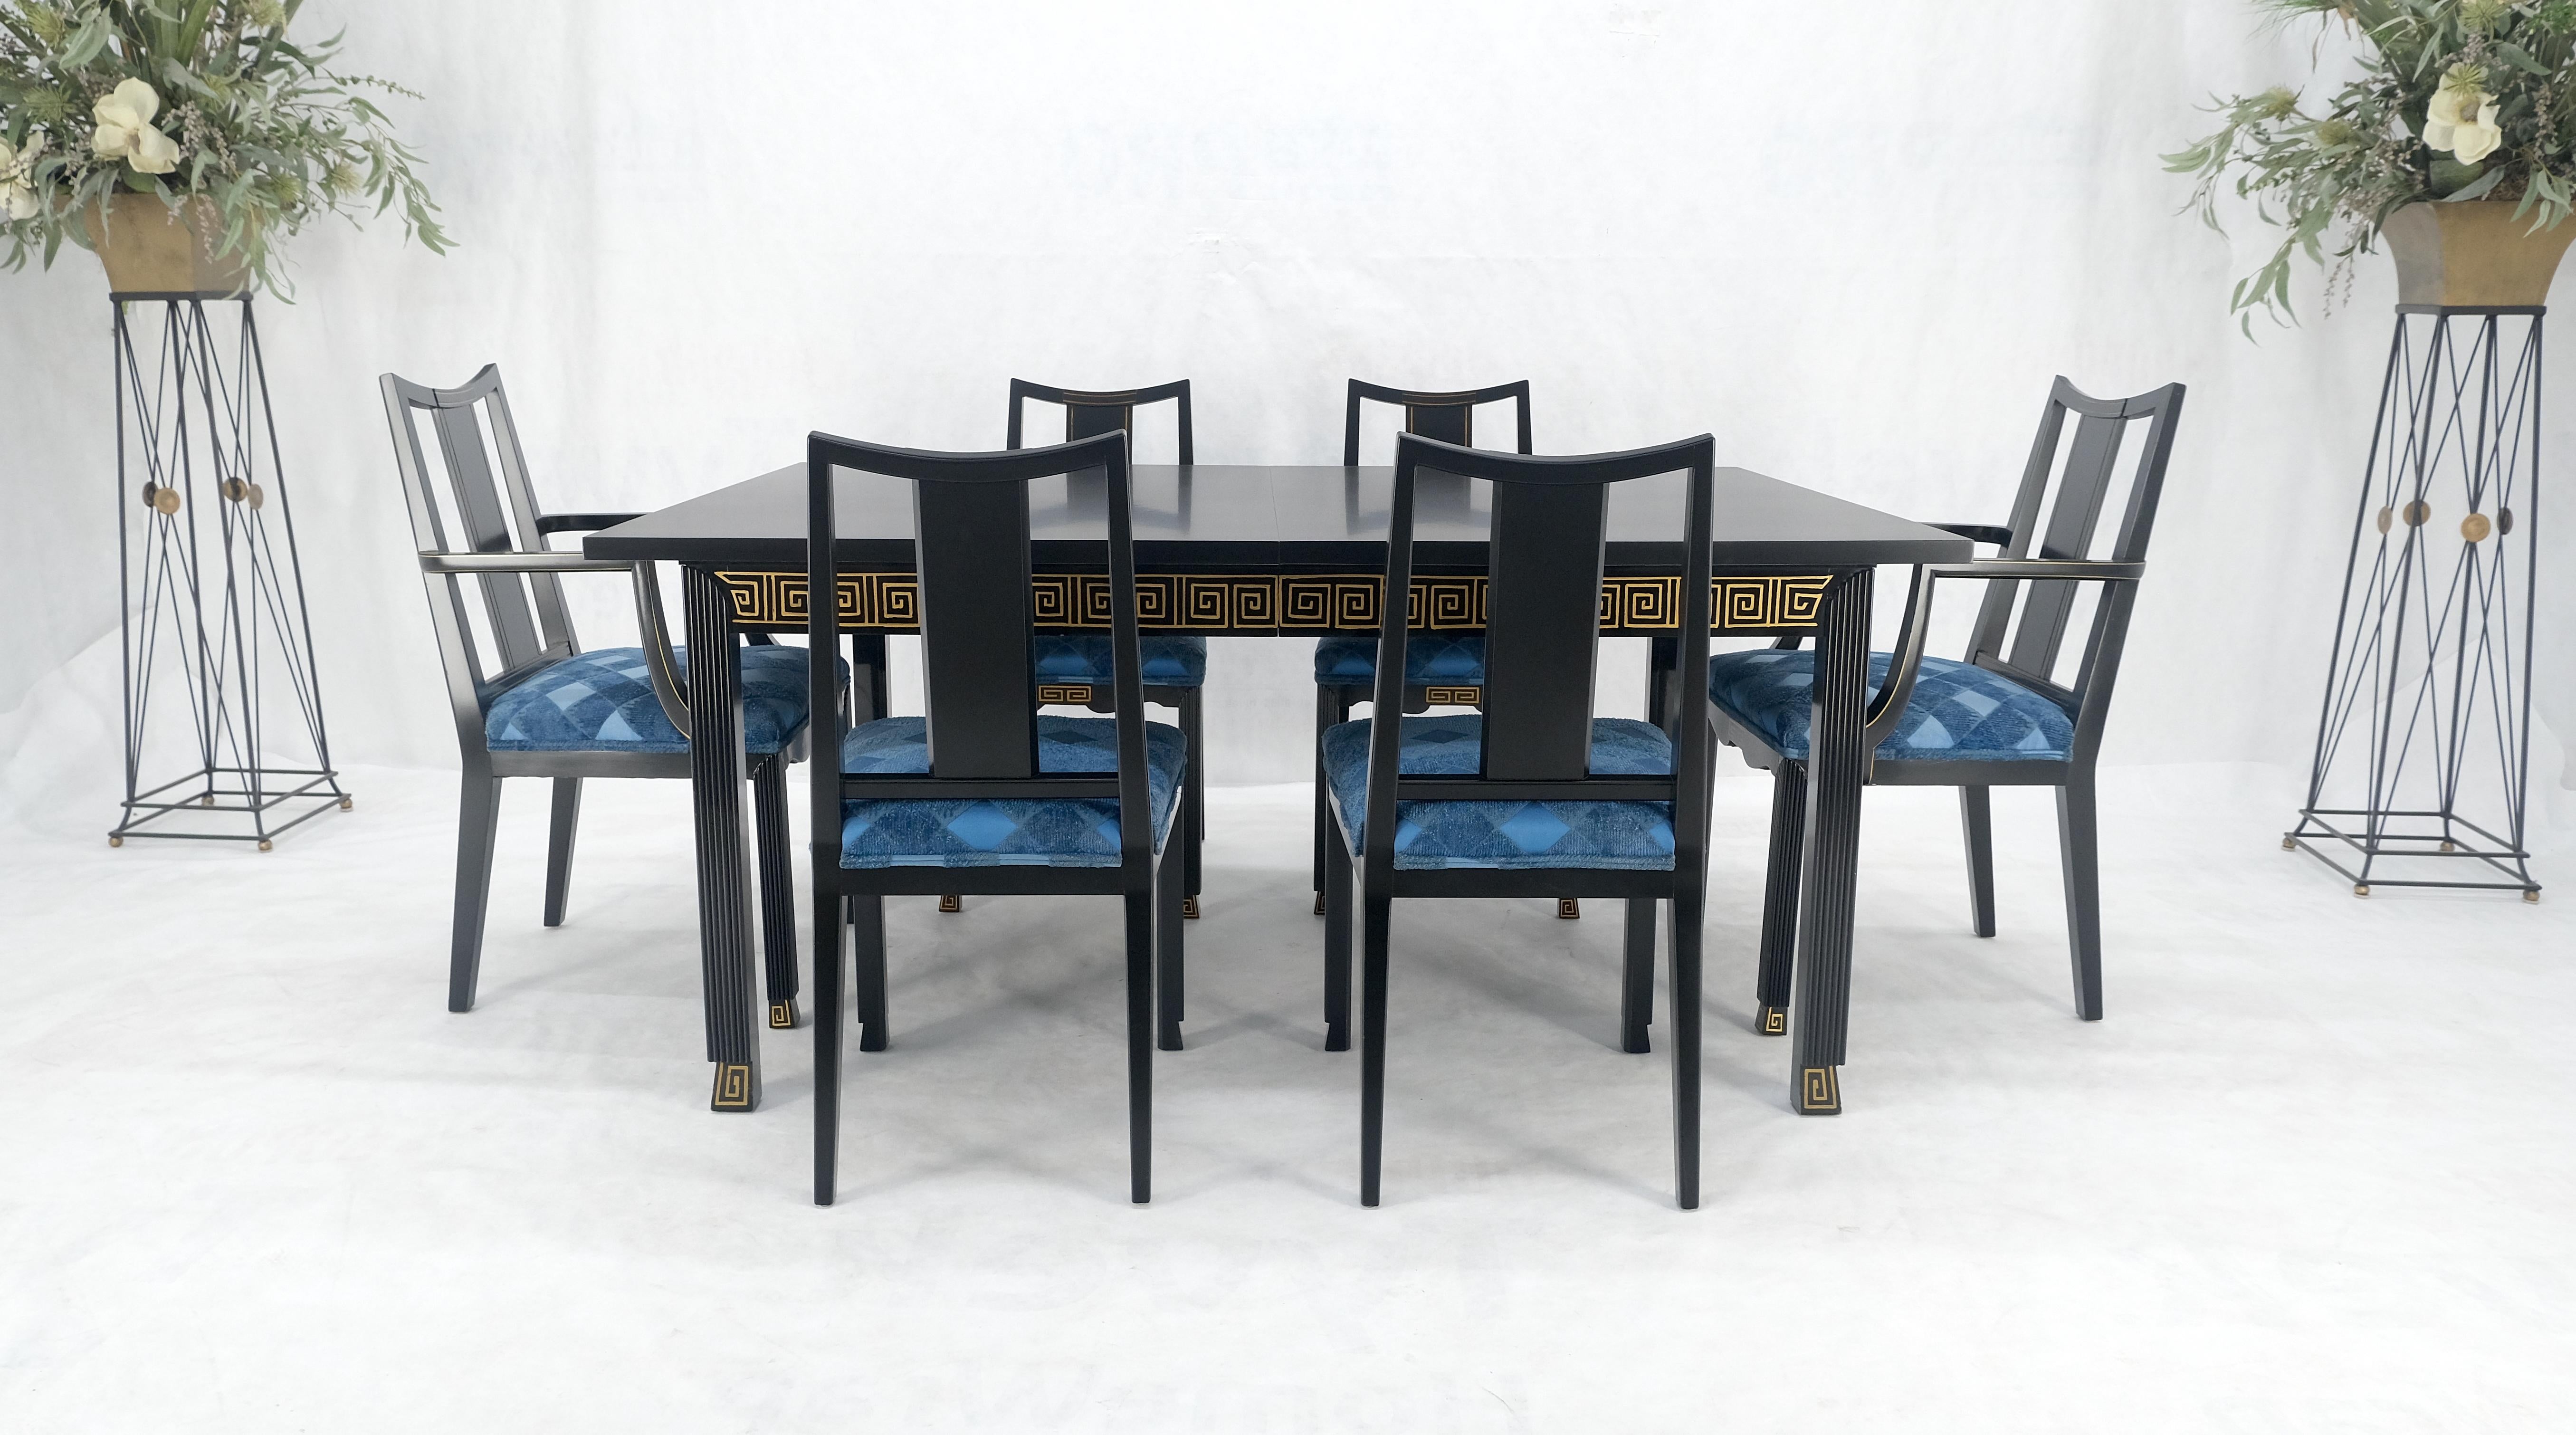 Upholstery Black Lacquer Gold Ornament Decorated 6 Chairs 2 Leaves Dining Table Set MINT! For Sale